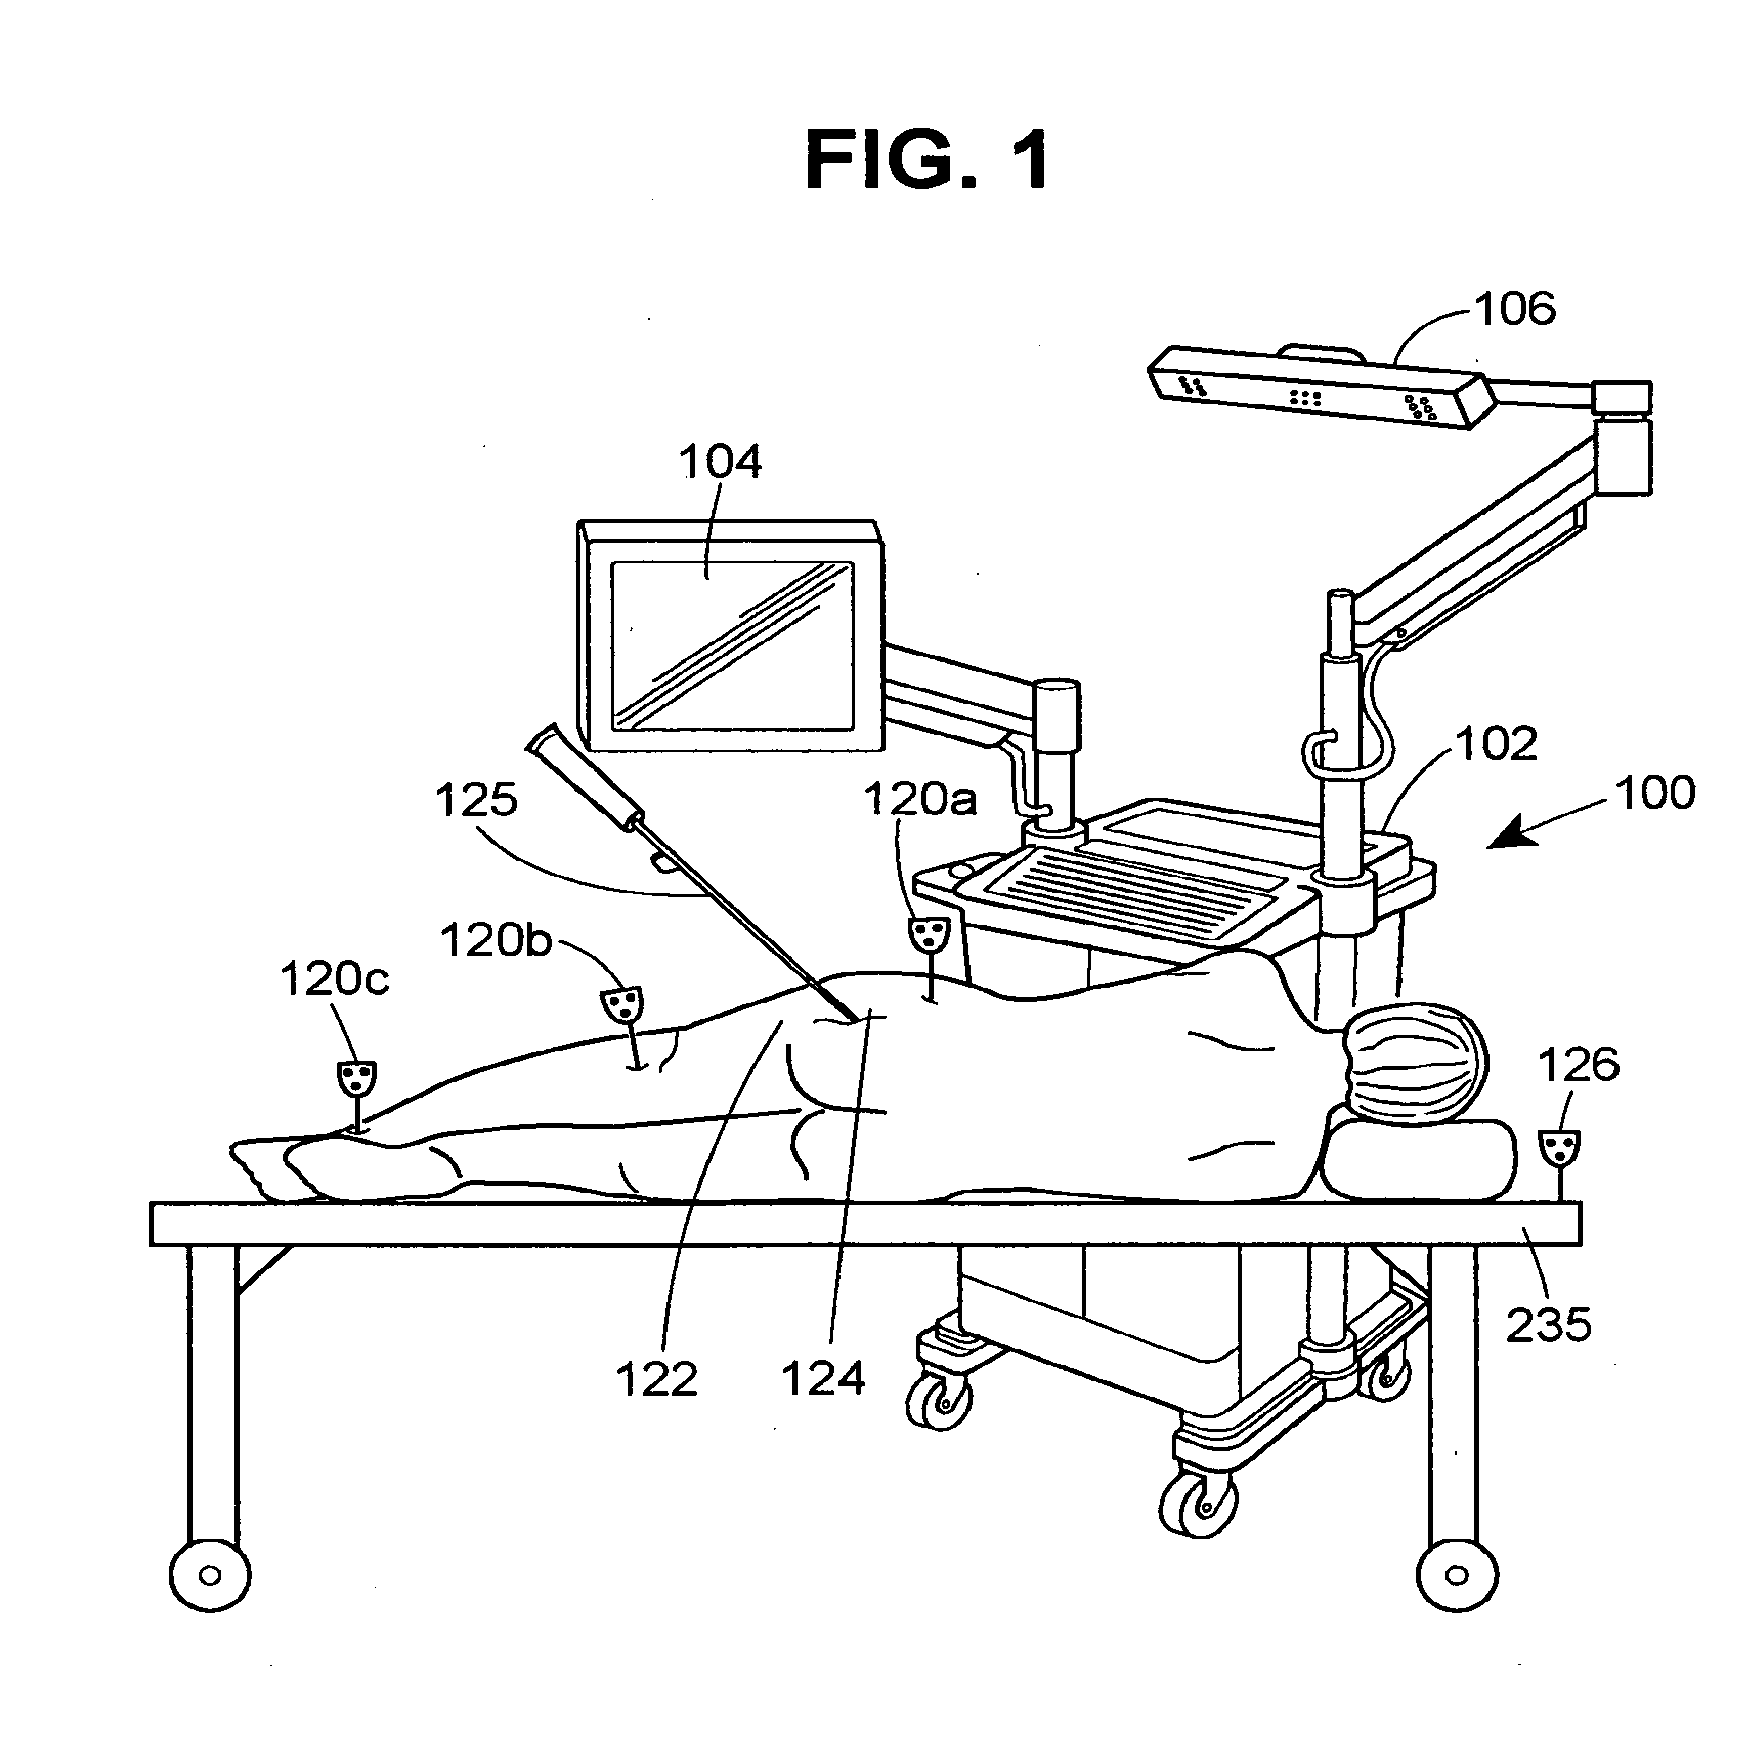 System and method for performing arthroplasty of a joint and tracking a plumb line plane